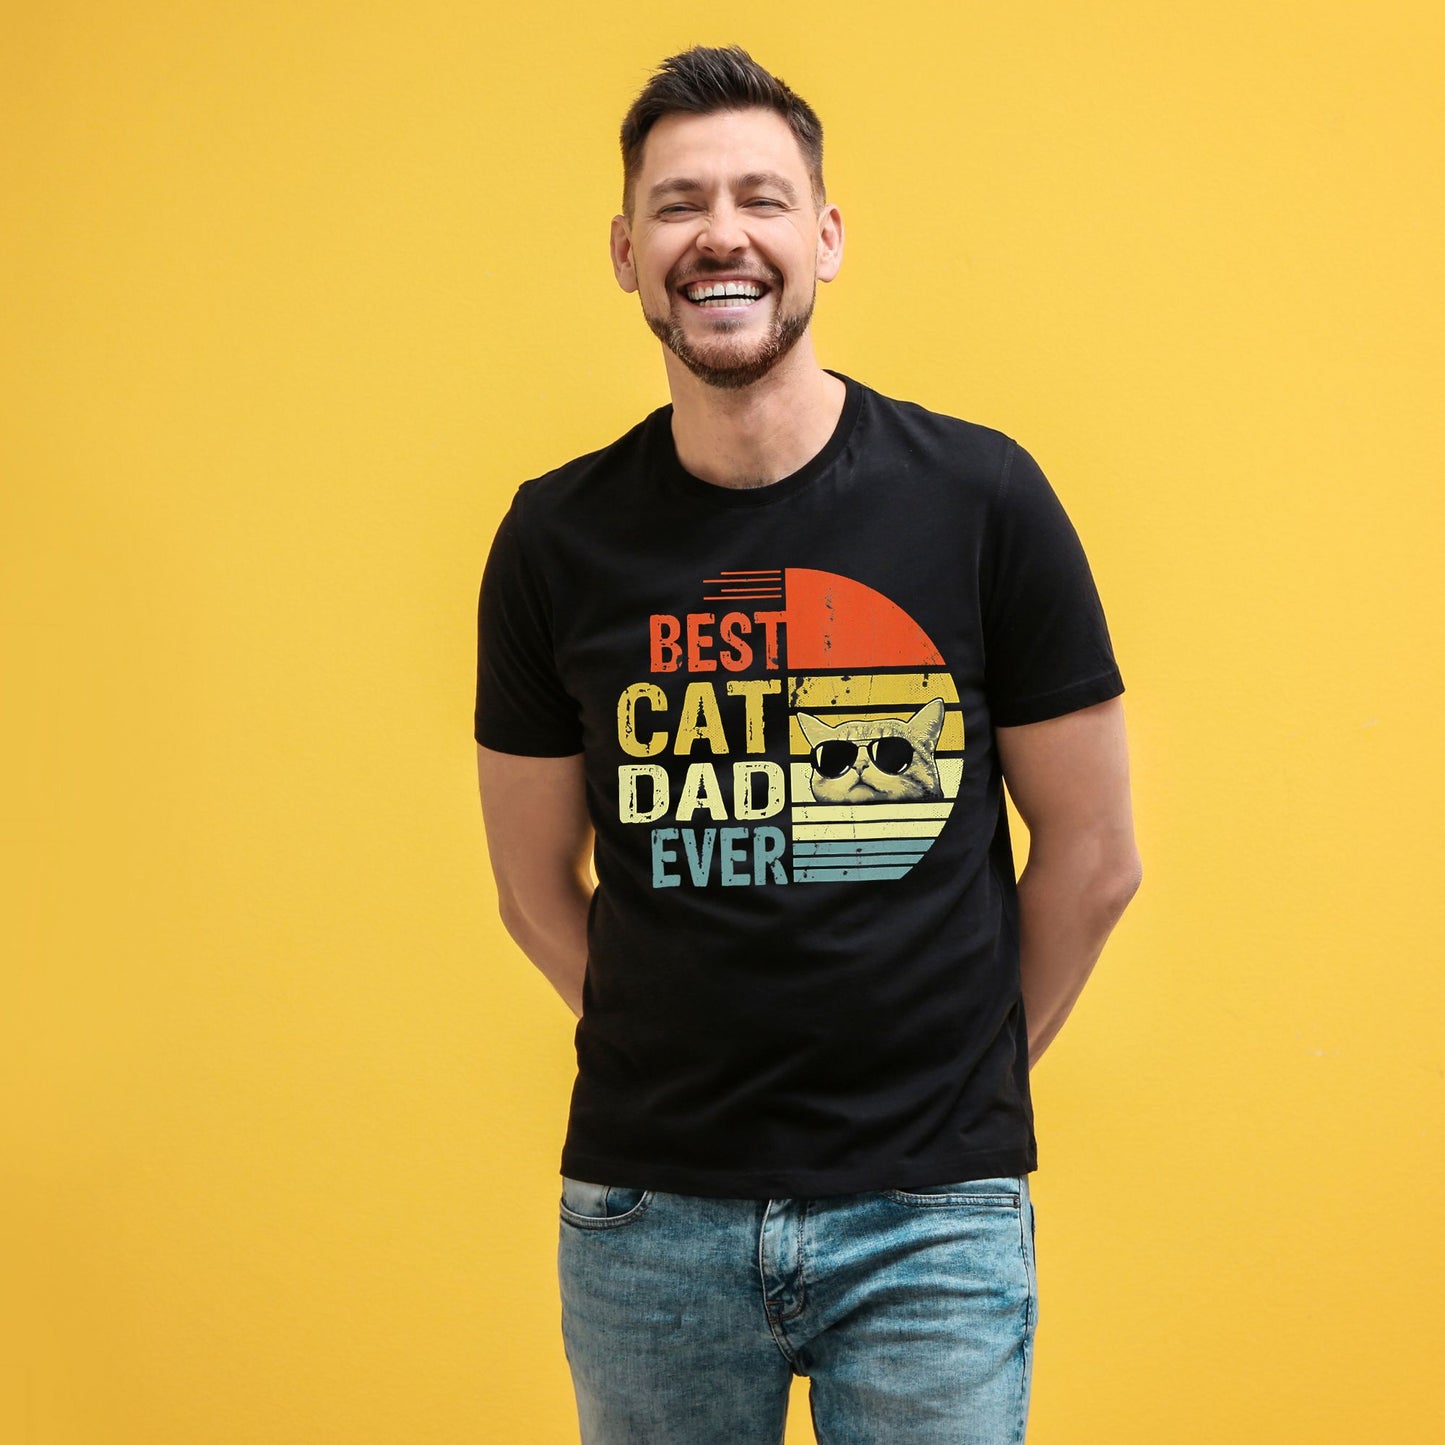 "Best Cat Dad Ever" Daddy T-Shirt: Perfect for Cat Lovers